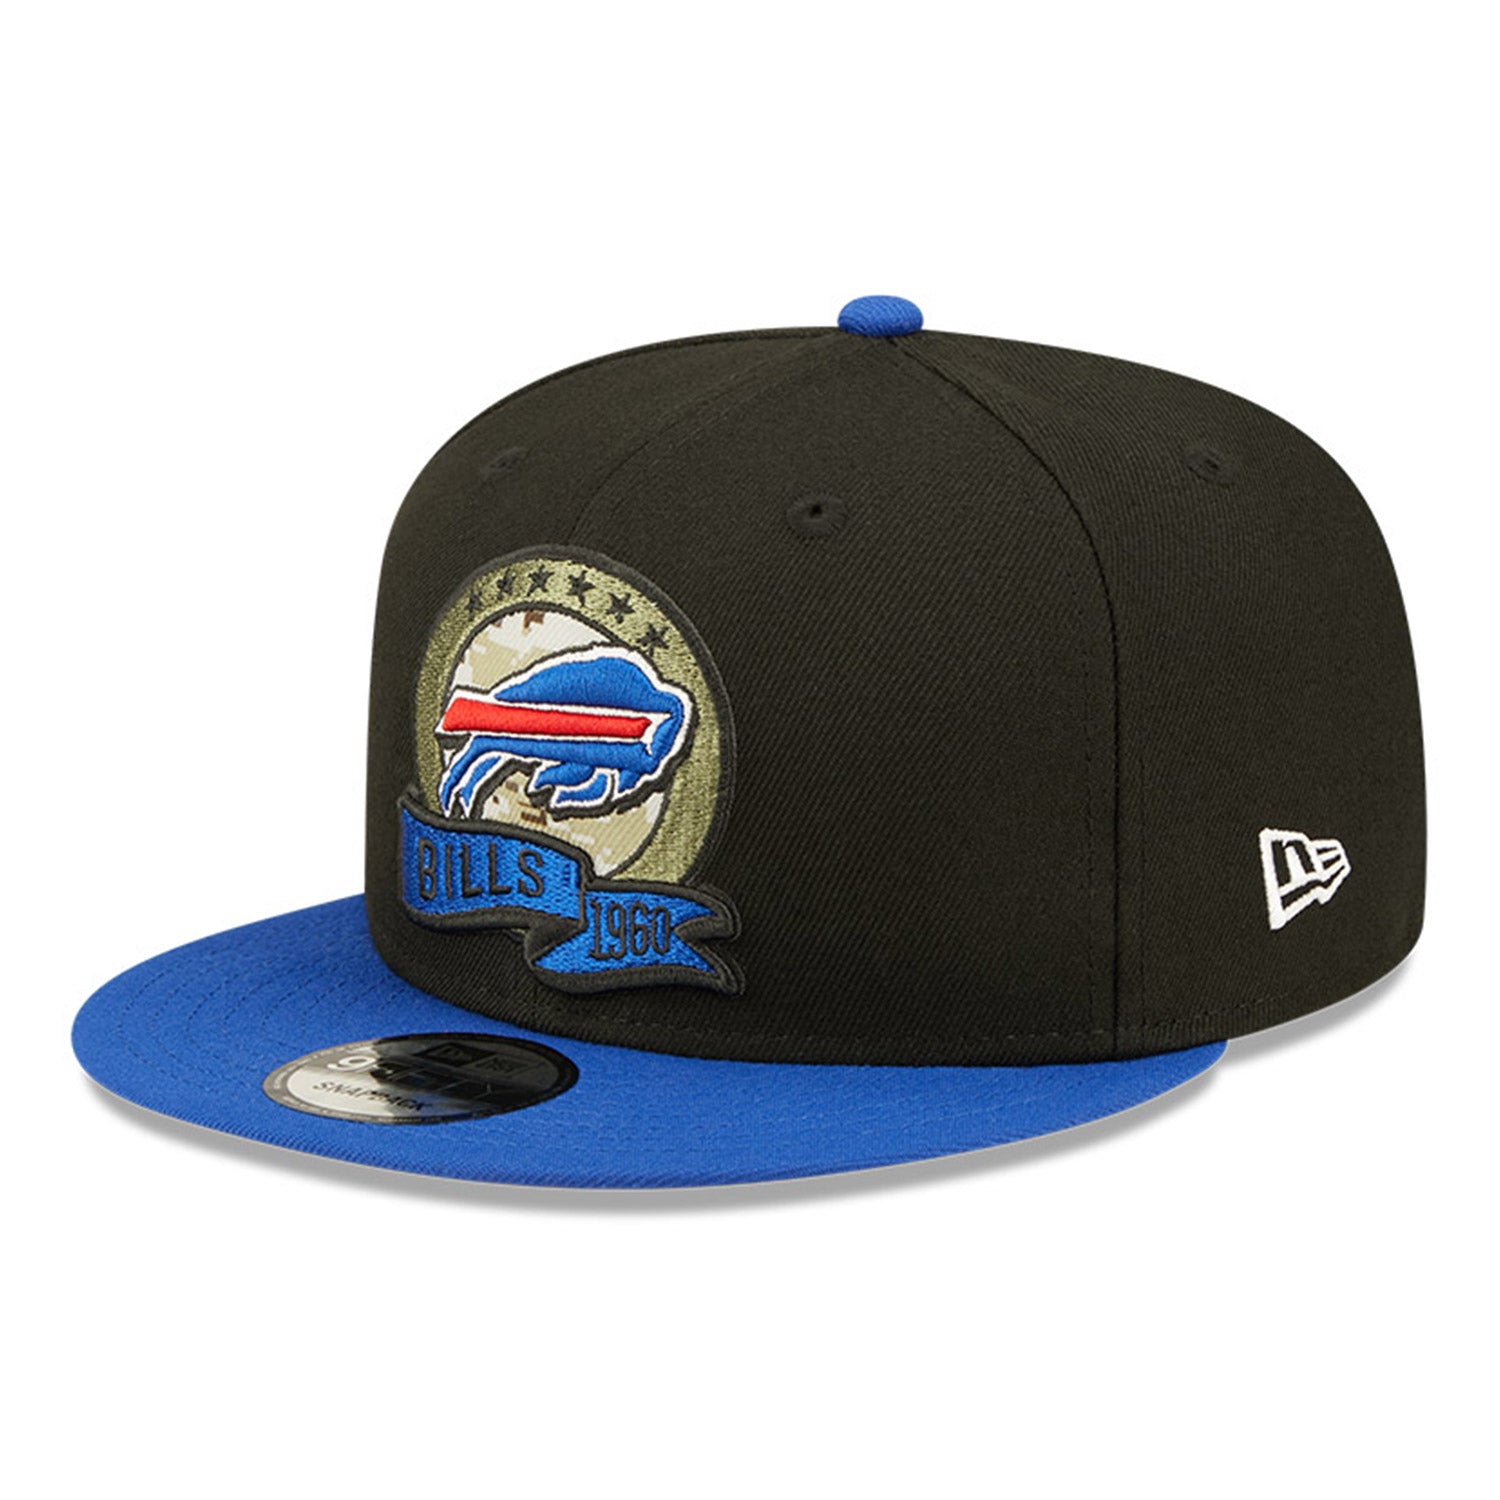 Buffalo Bills Salute to Service Collection The Bills Store